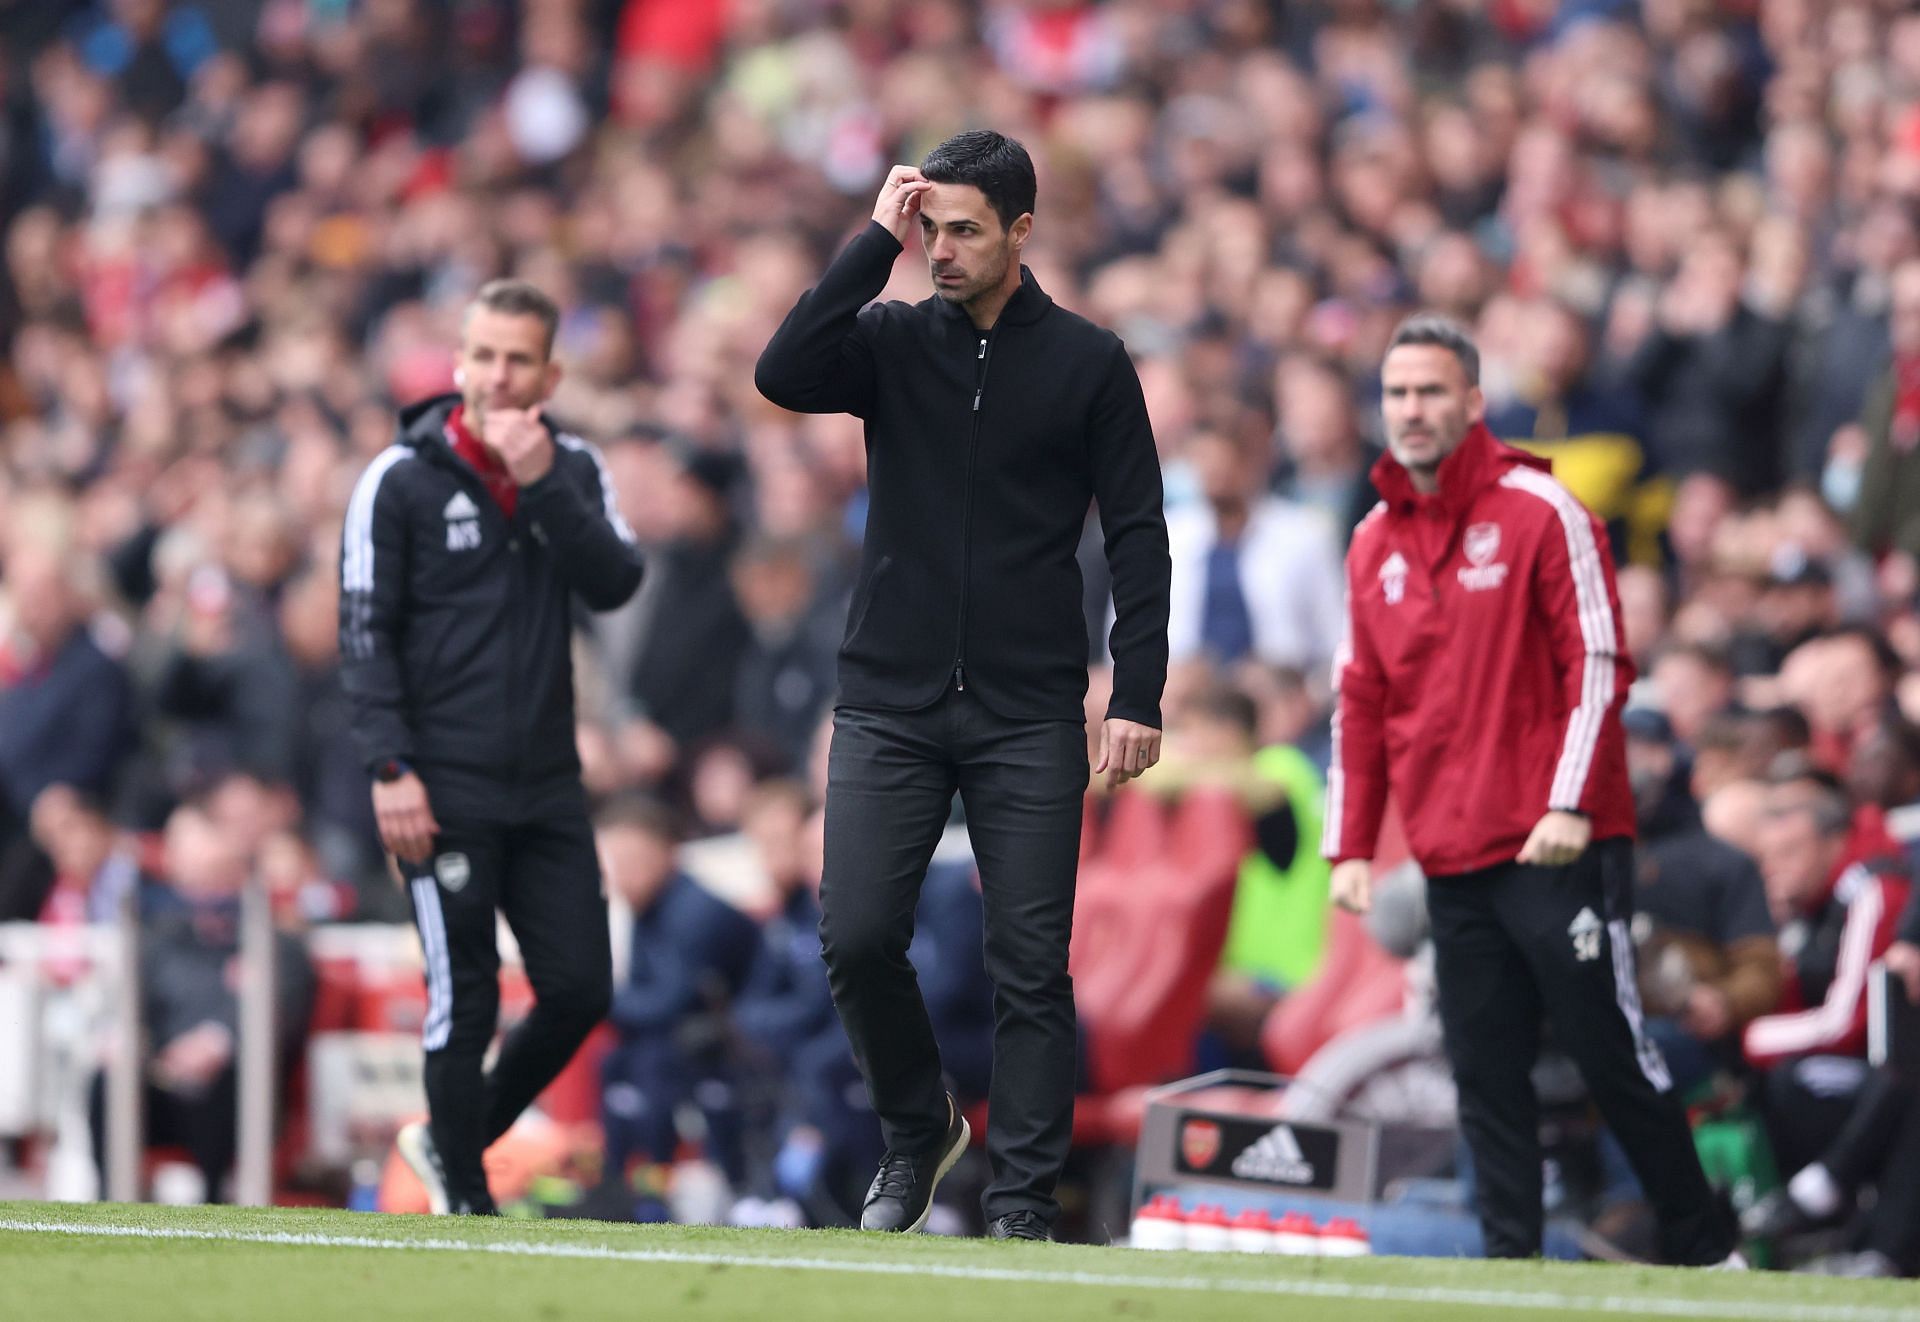 Arteta has encountered a problematic period at the business end of the season